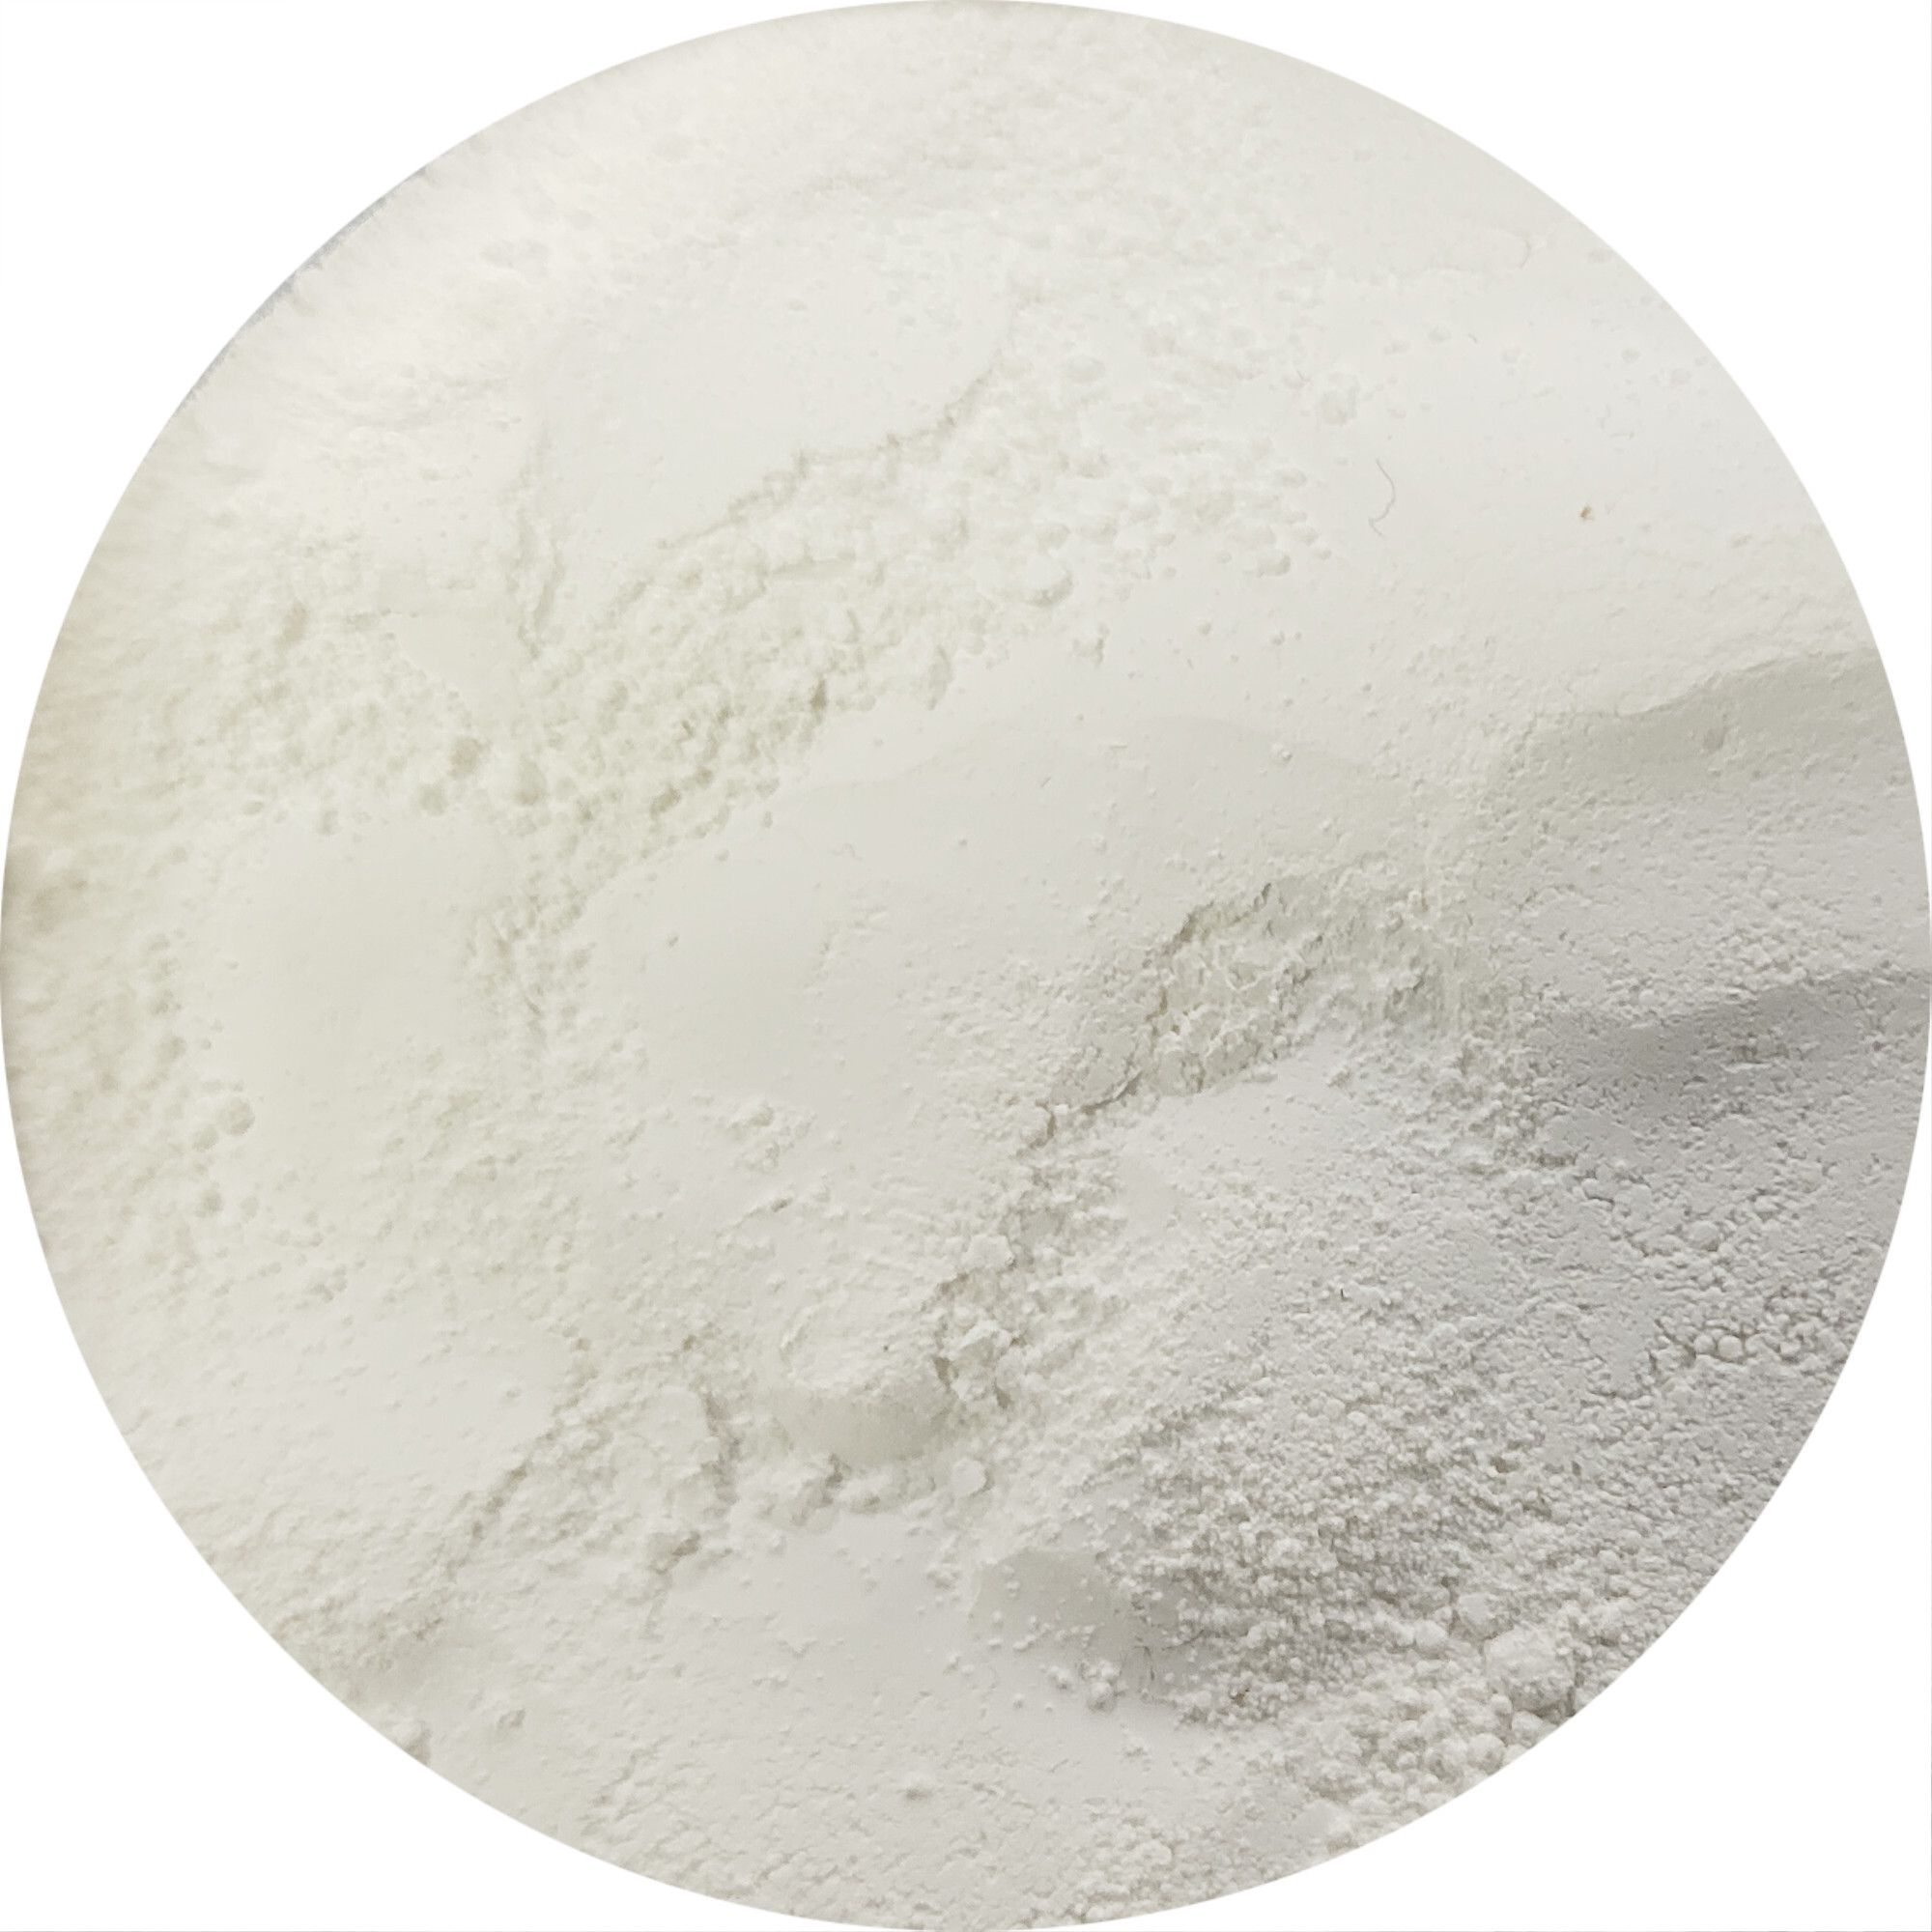 Wholesale China Bar Shampoo And Conditioner Factory Suppliers - Sunsafe-T201OT / Titanium dioxide(and) Alumina(and) Stearic Acid  – Uniproma